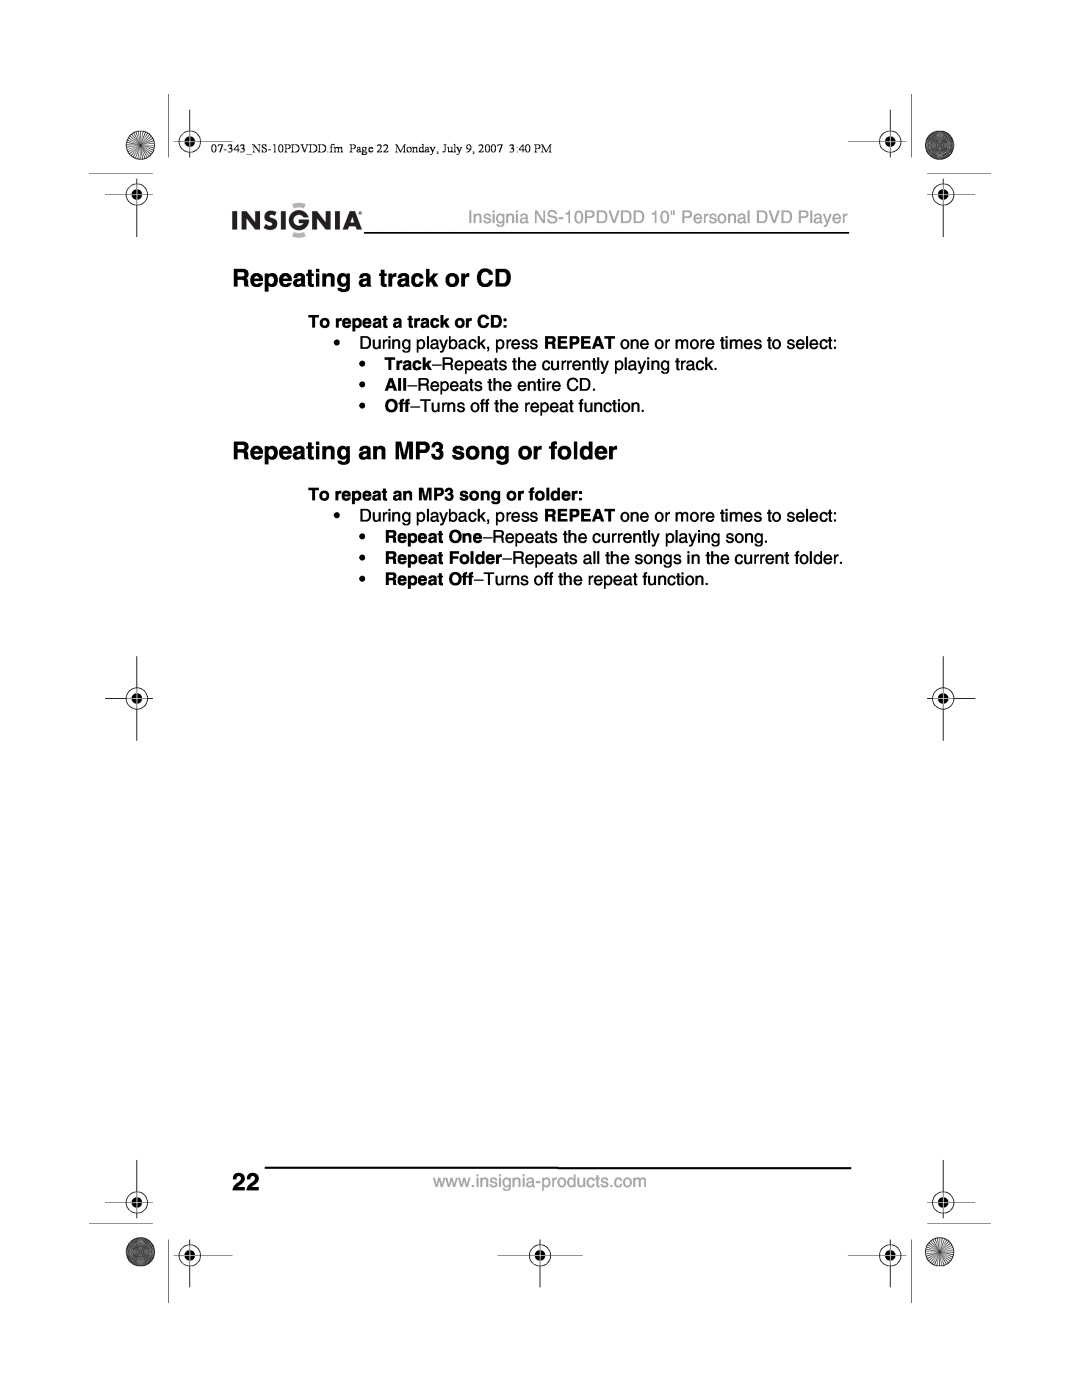 Insignia NS-10PDVDD manual Repeating a track or CD, Repeating an MP3 song or folder, To repeat a track or CD 